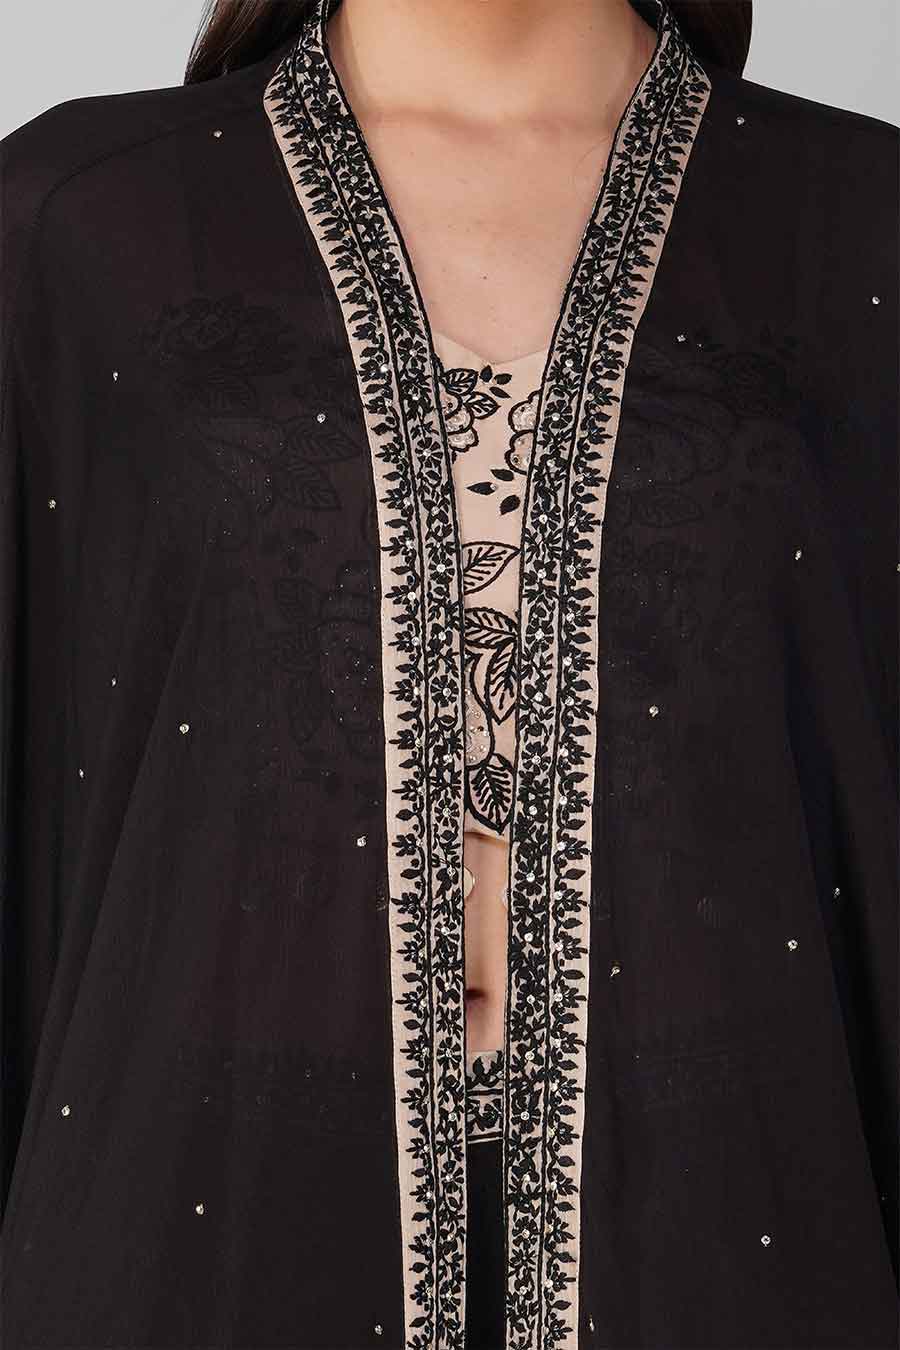 Black Embroidered Cape And Gharara Set